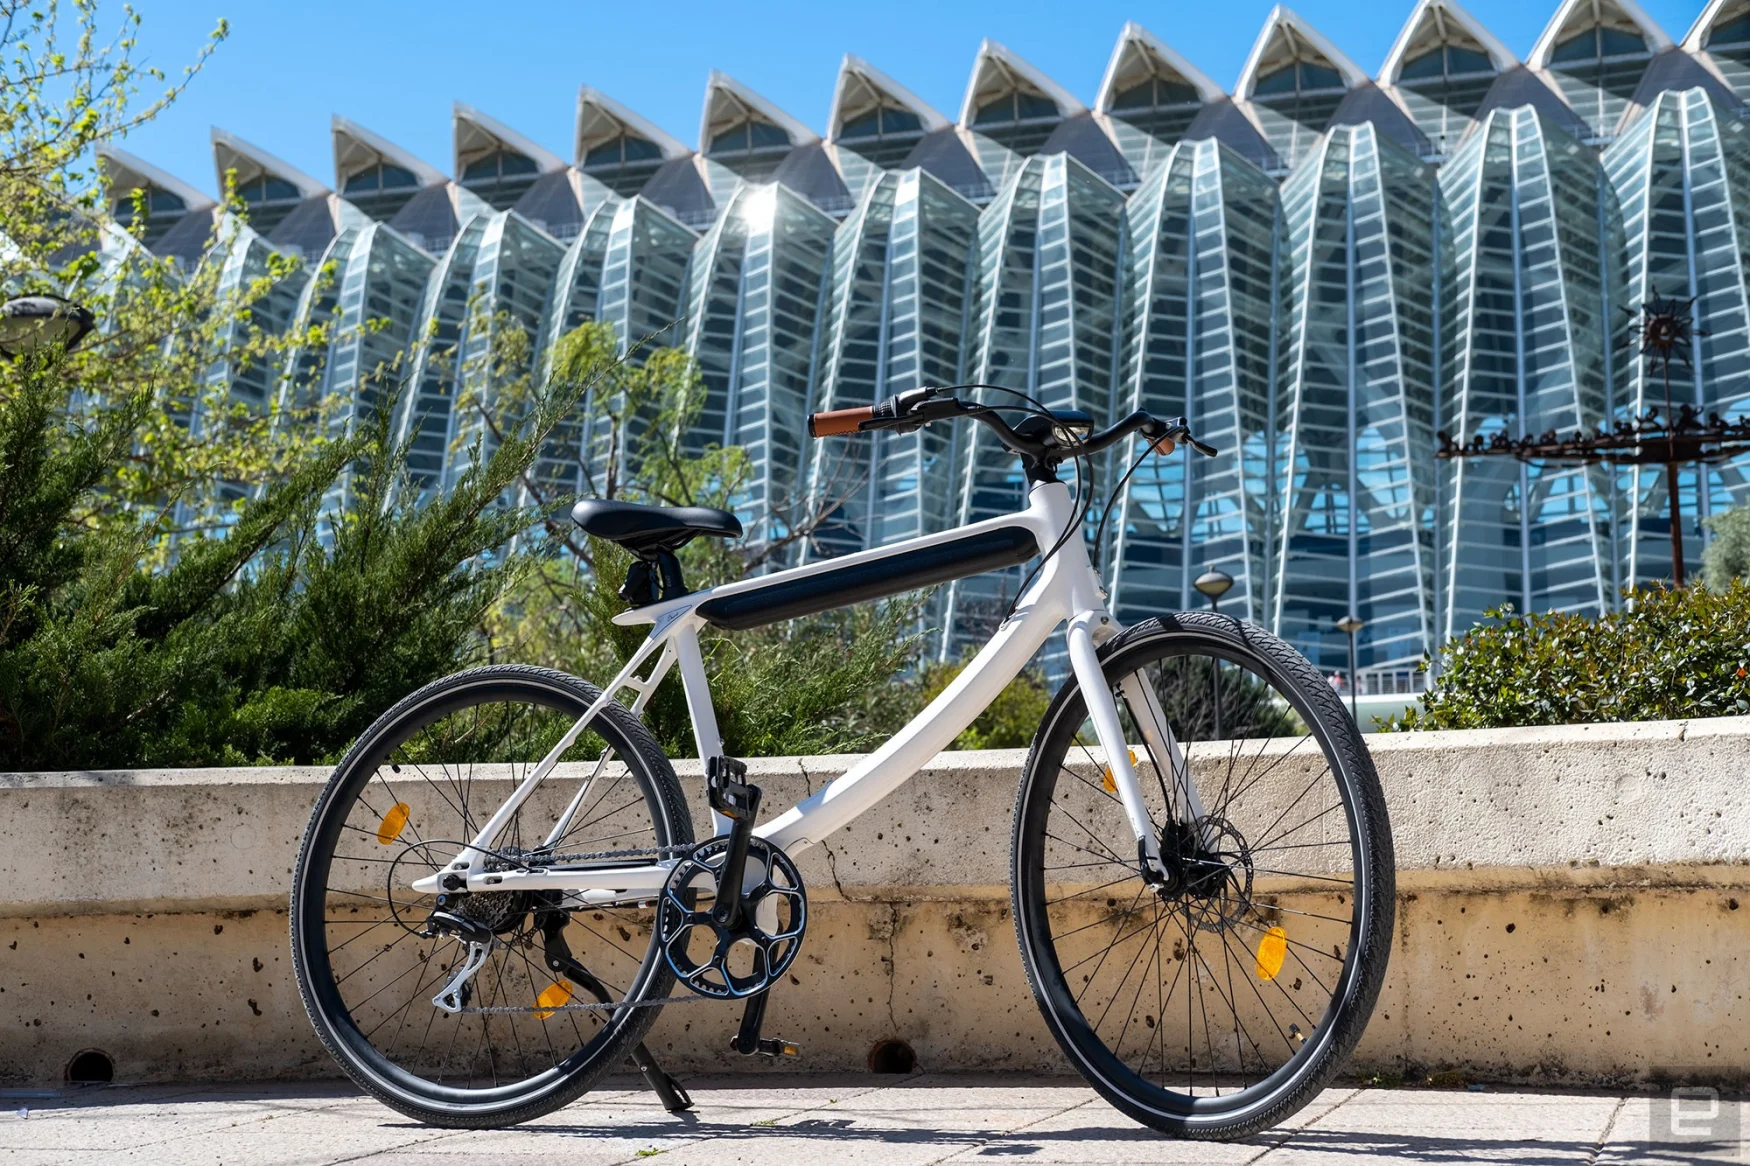 Urtopia's Chord e-bike pictured in front of Valencia's Arts and Sciences.